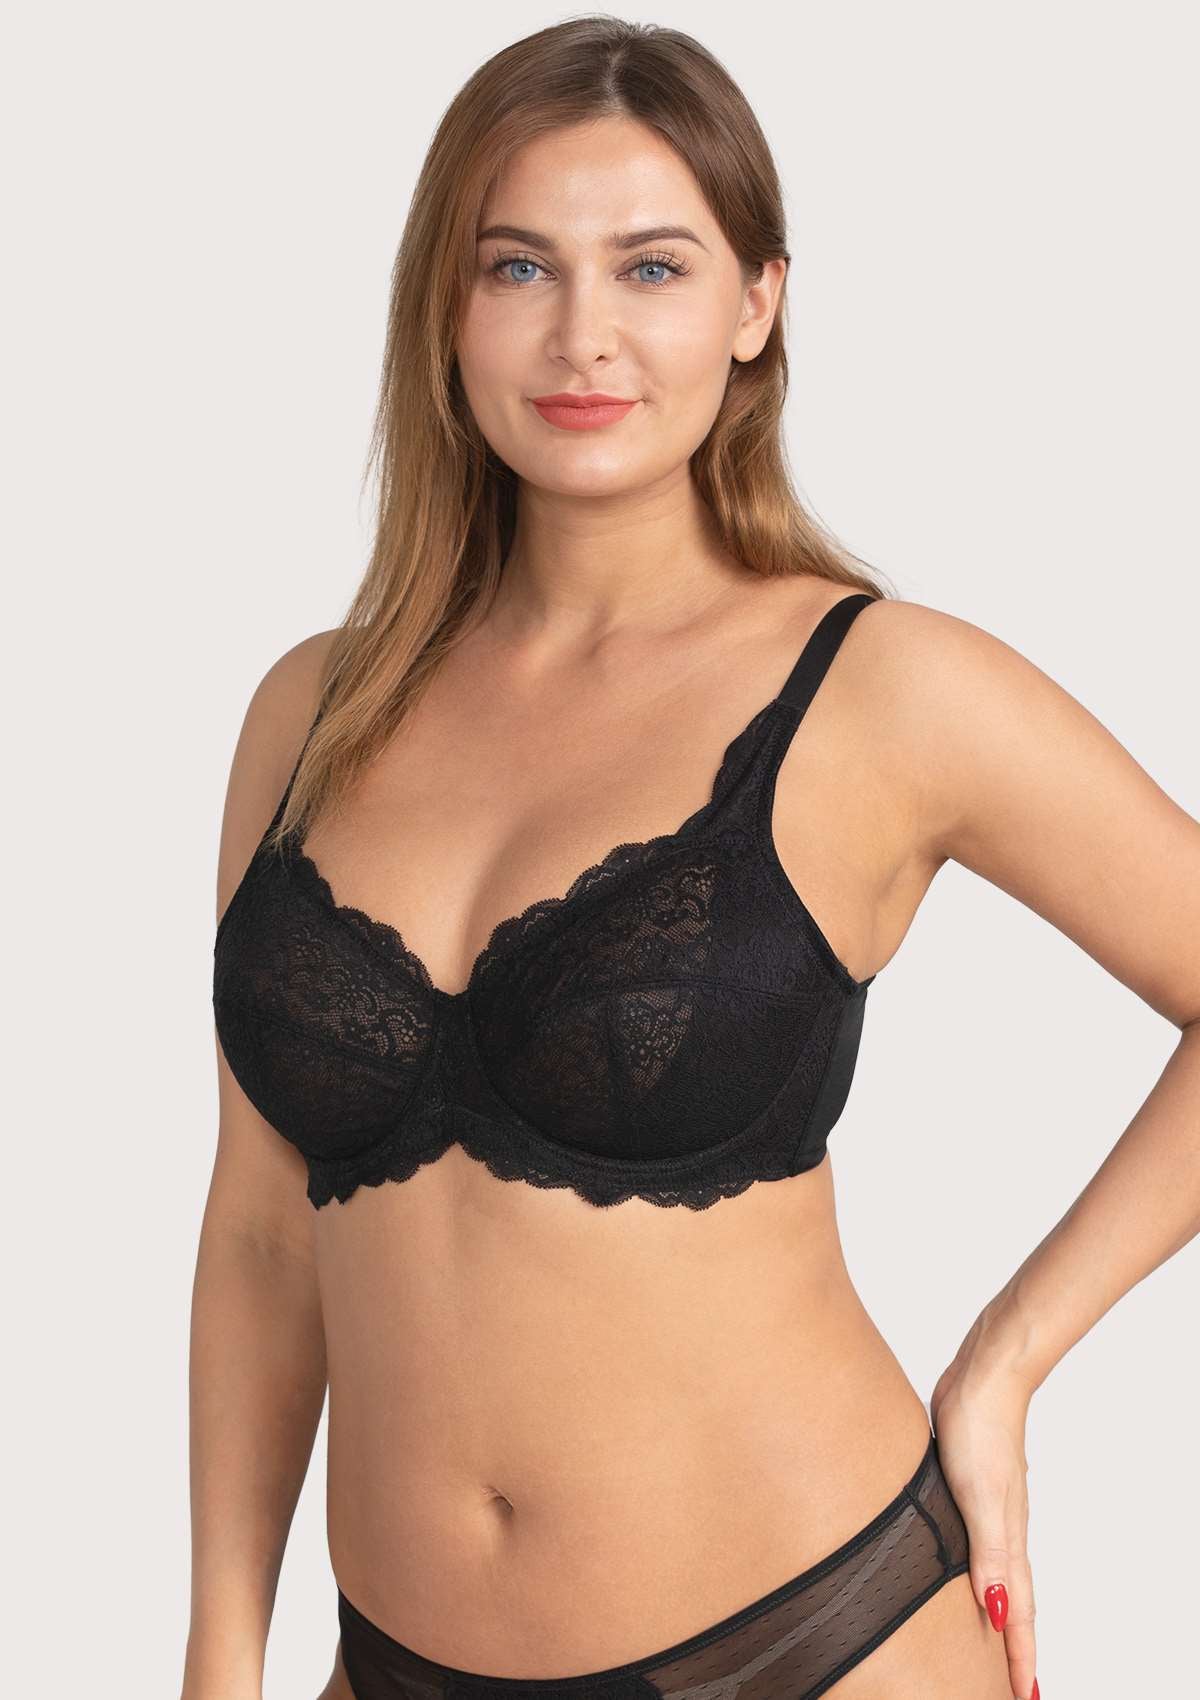 HSIA All-Over Floral Lace Unlined Bra: Minimizer Bra For Heavy Breasts - Black / 34 / DDD/F